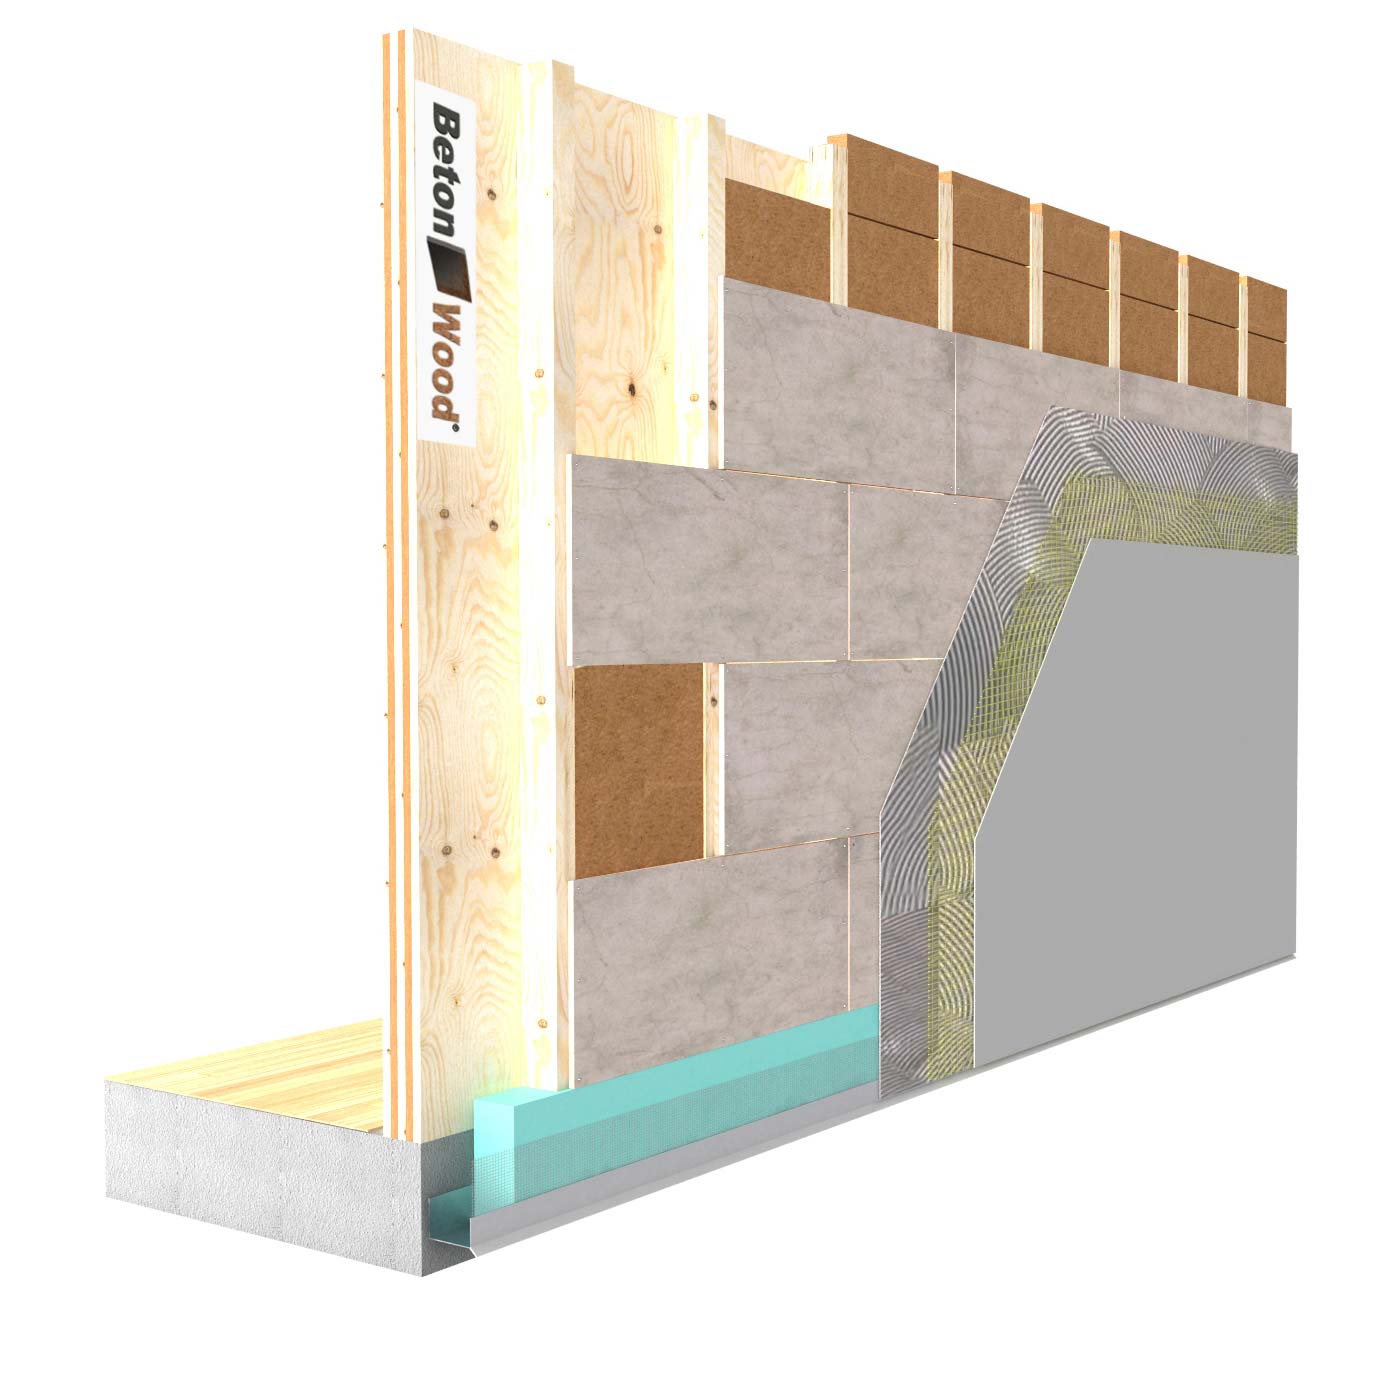 External insulation system with Protect fiber wood on wooden walls